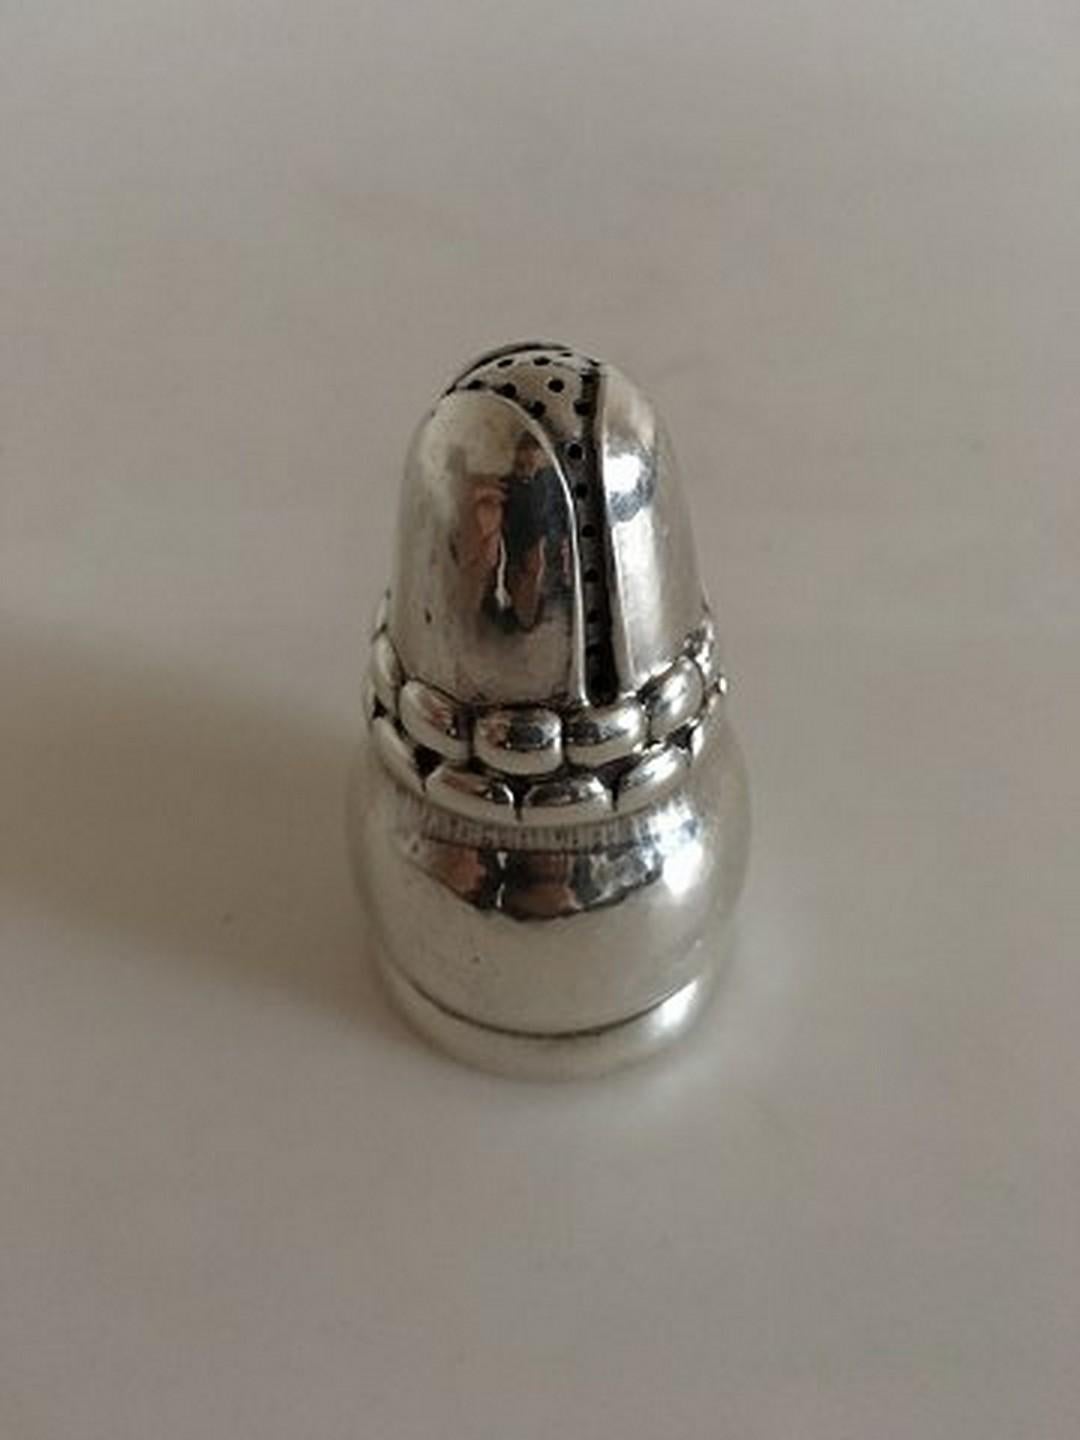 Georg Jensen silver pepper shaker no 5. Early pepper shaker in nice condition, from 1904-1910. 7.5 cm H (2 61/64